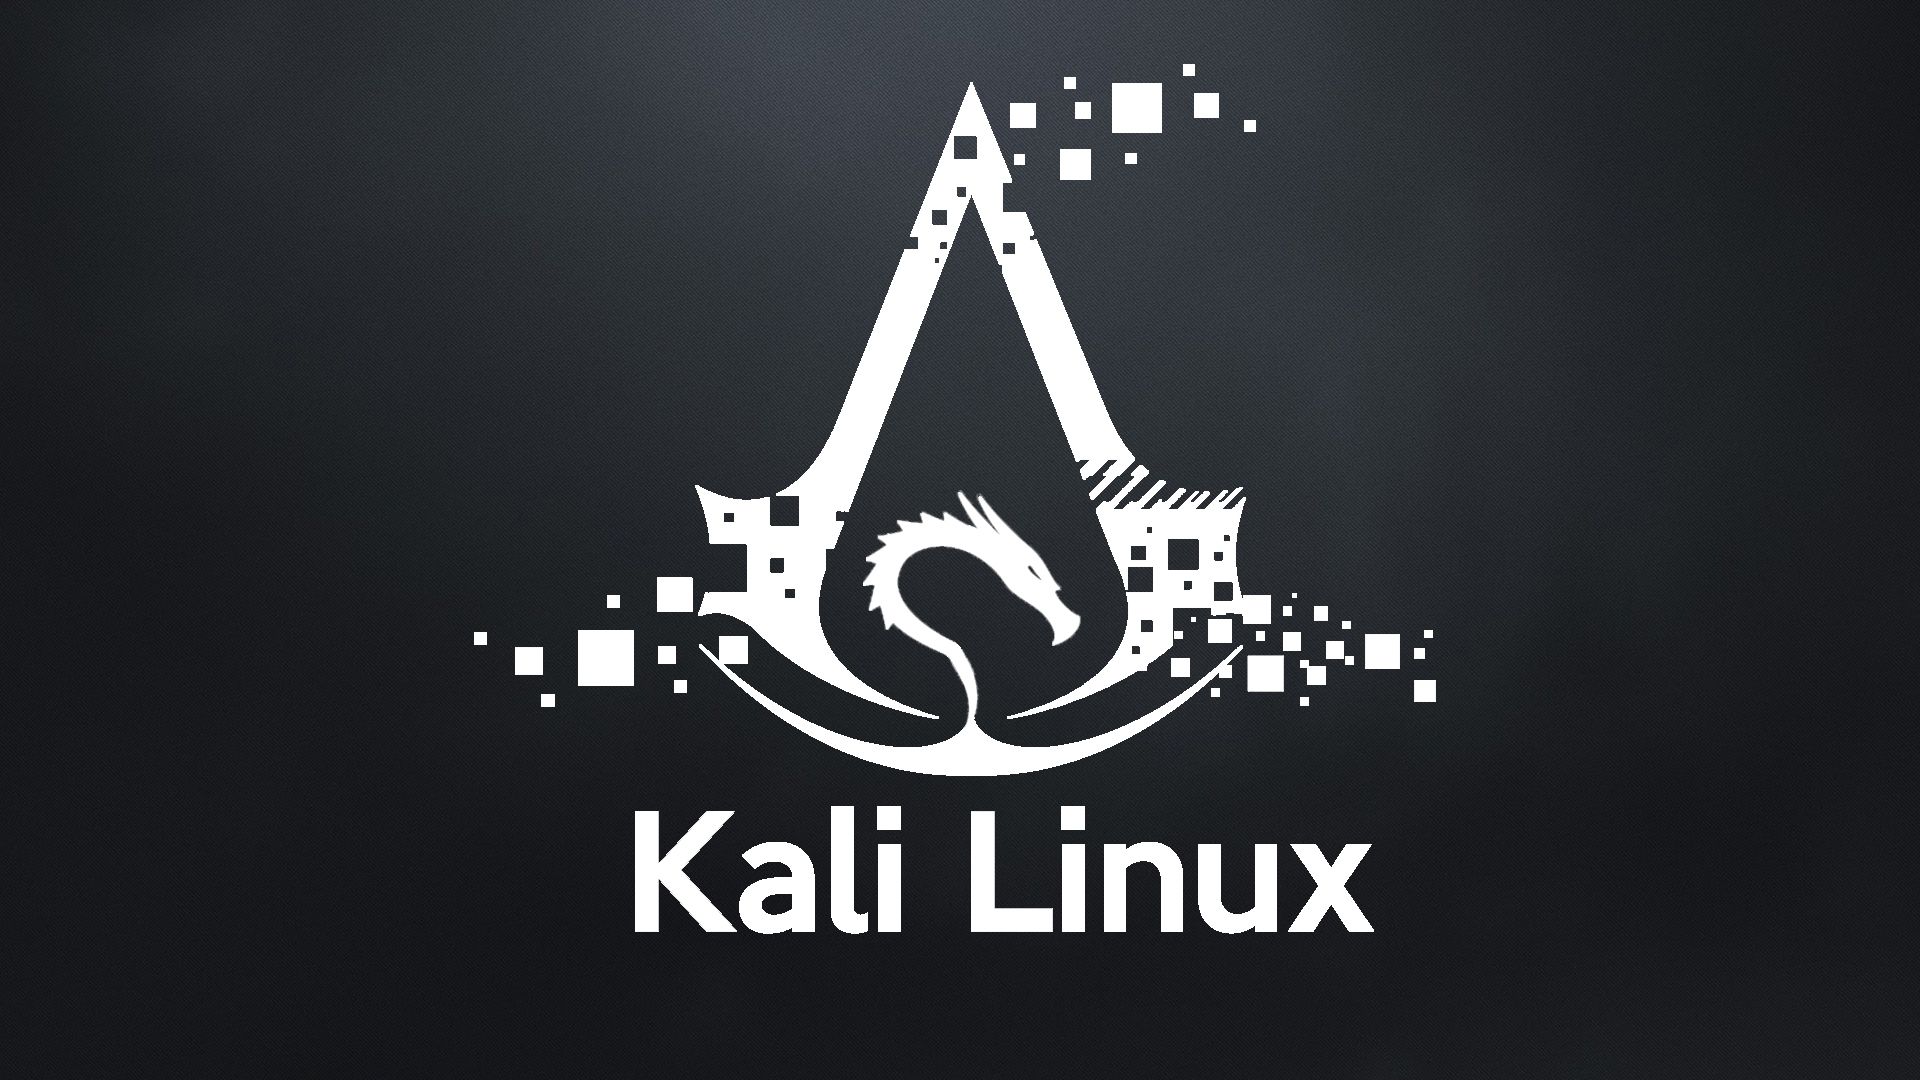 10 Kali Linux HD Wallpapers and Backgrounds